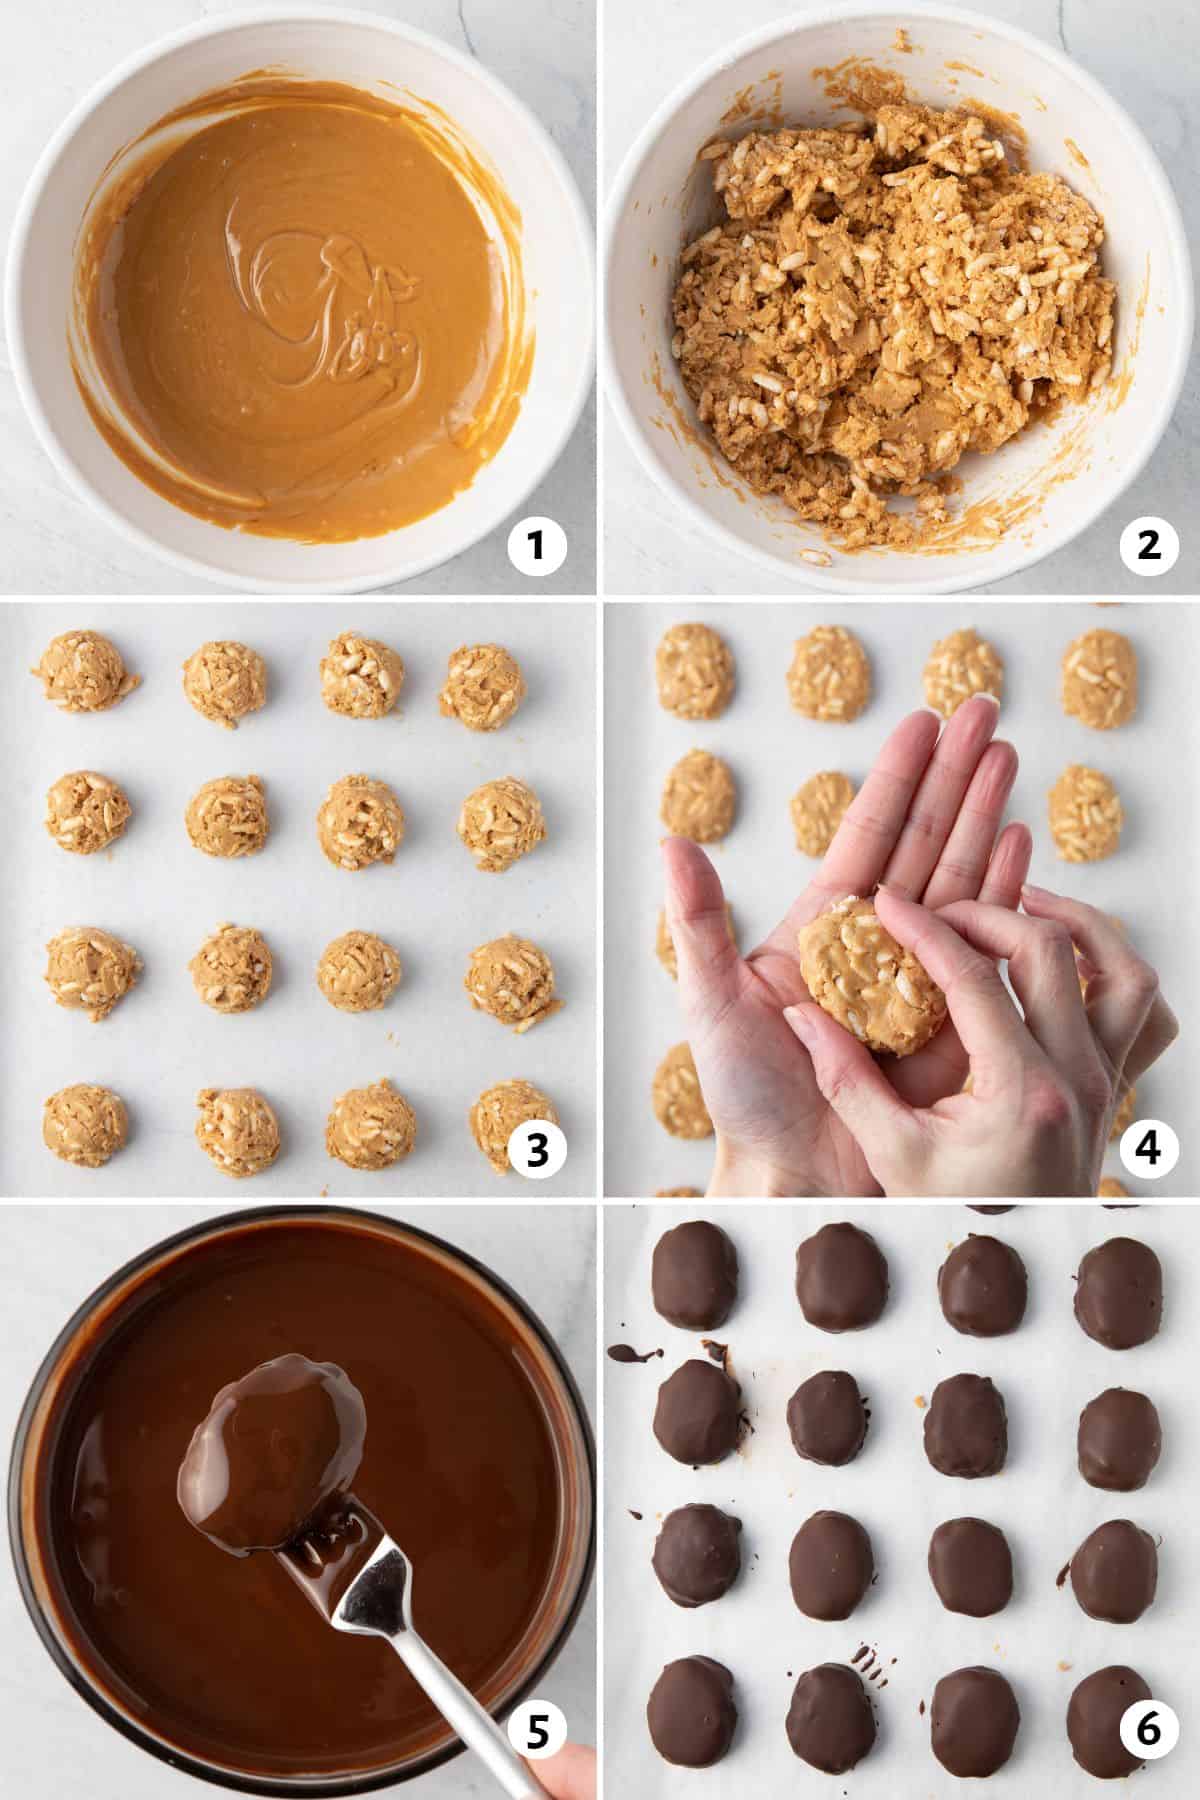 6 image collage making recipe: 1- Peanut butter and butter in a clear bowl melted and combined with vanilla, 2- Melted PB & Butter mixture in a large clear bowl combined with puffed rice, powdered sugar and salt, 3-